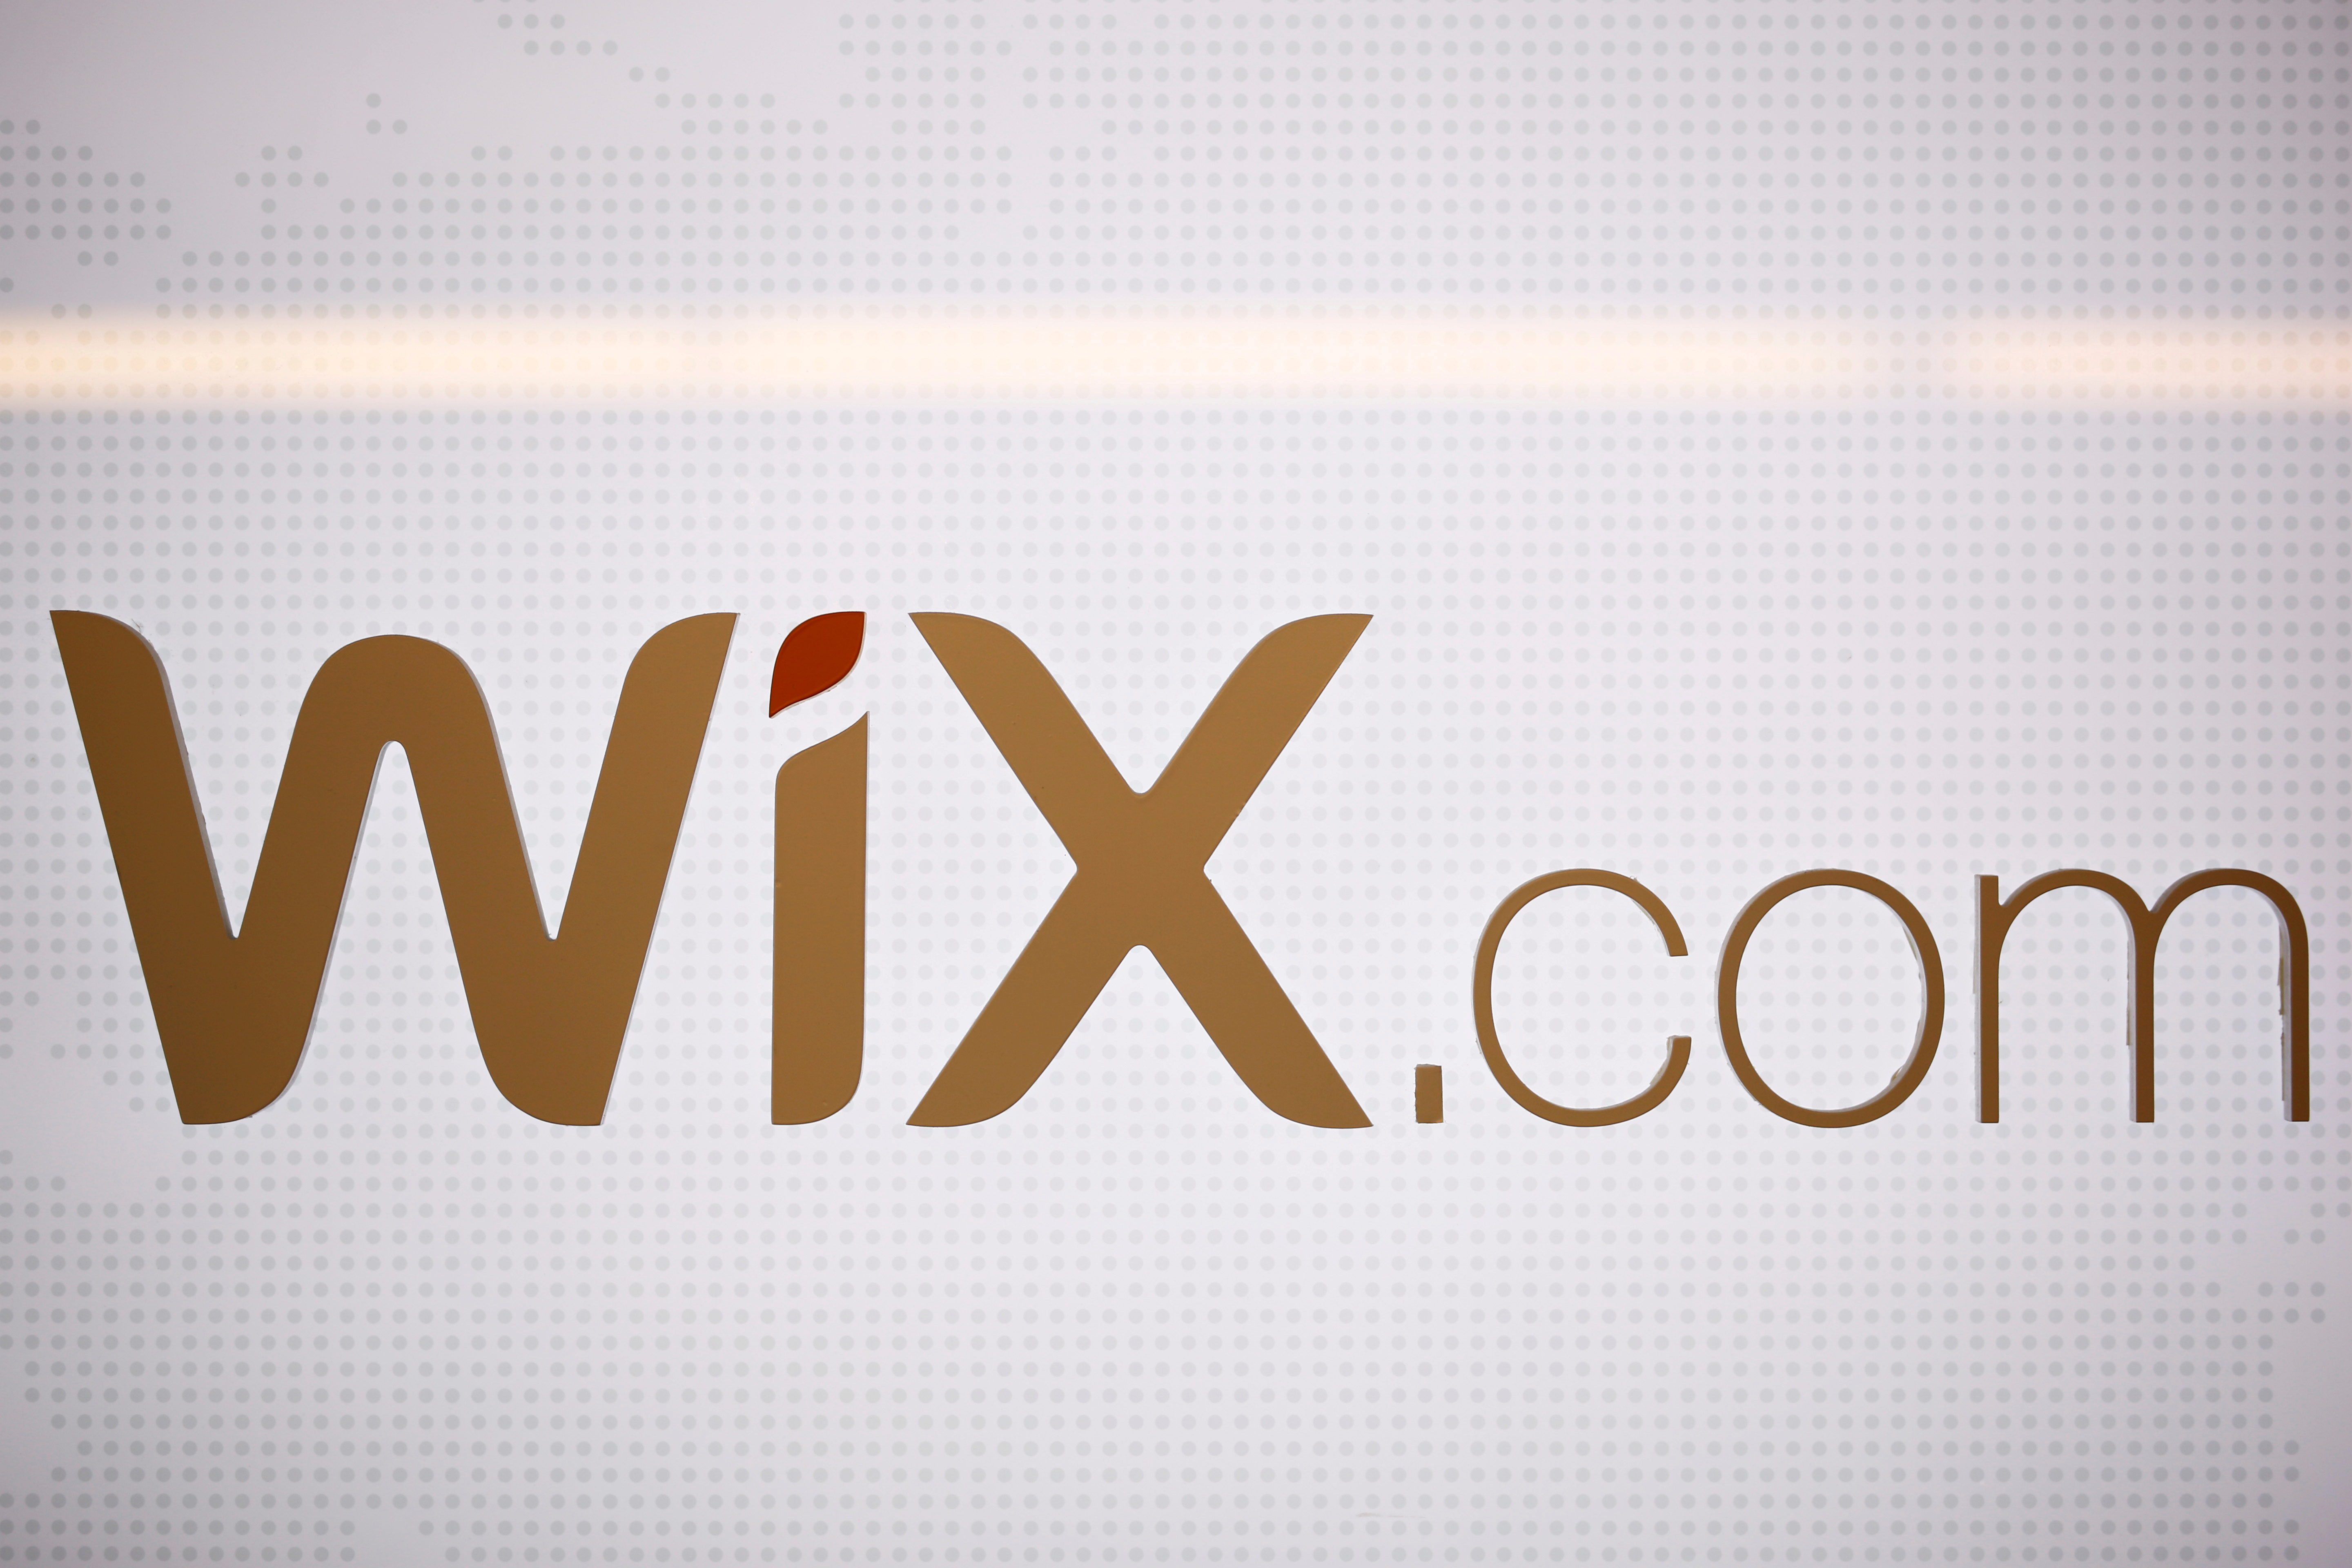 The logo of website-designer firm Wix.com is seen at a high-tech park in Beersheba